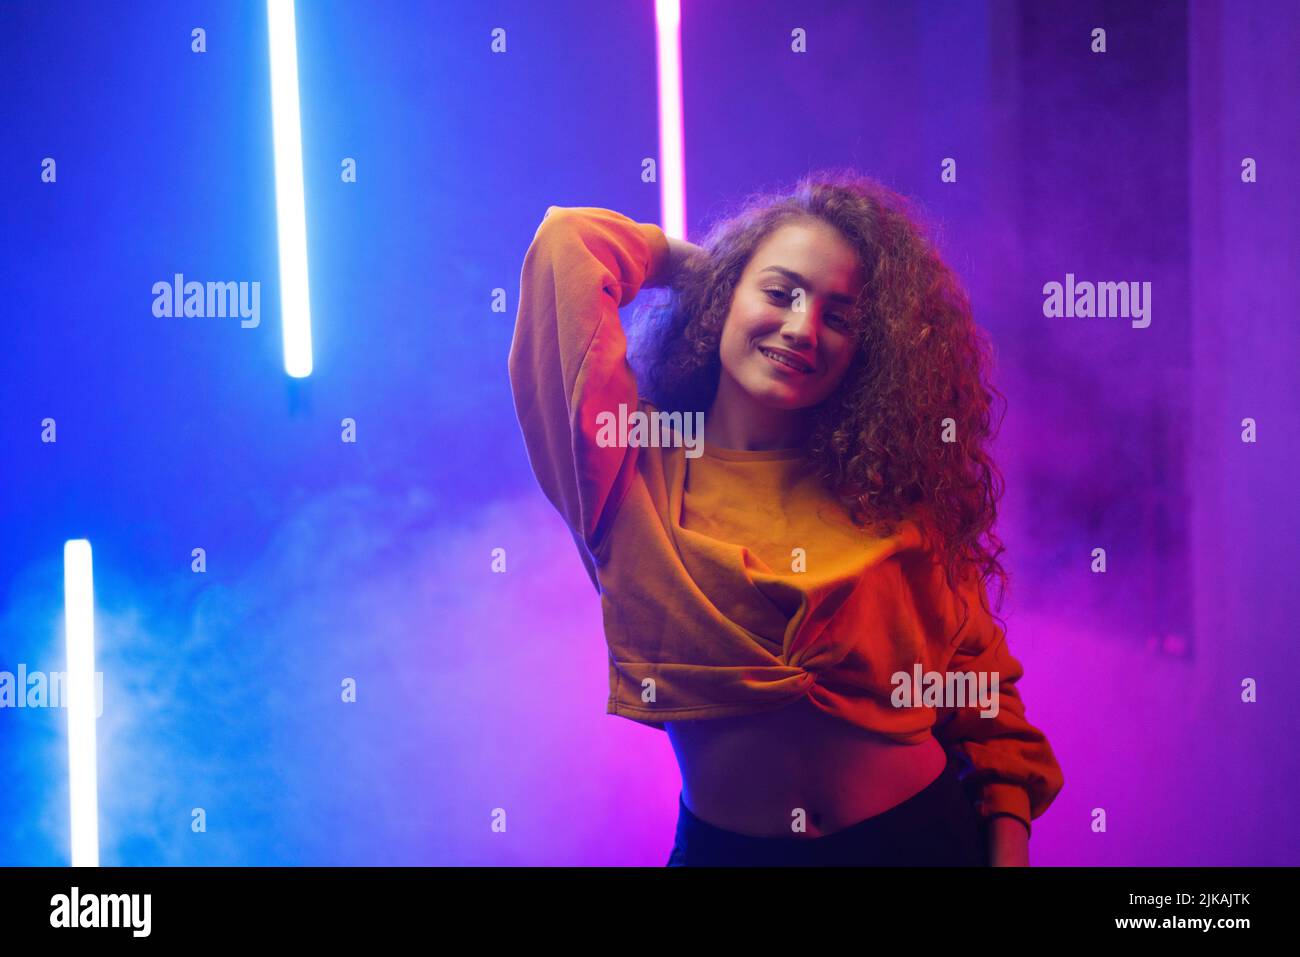 Portrait of a happy young woman dancing over neon light background at disco party Stock Photo